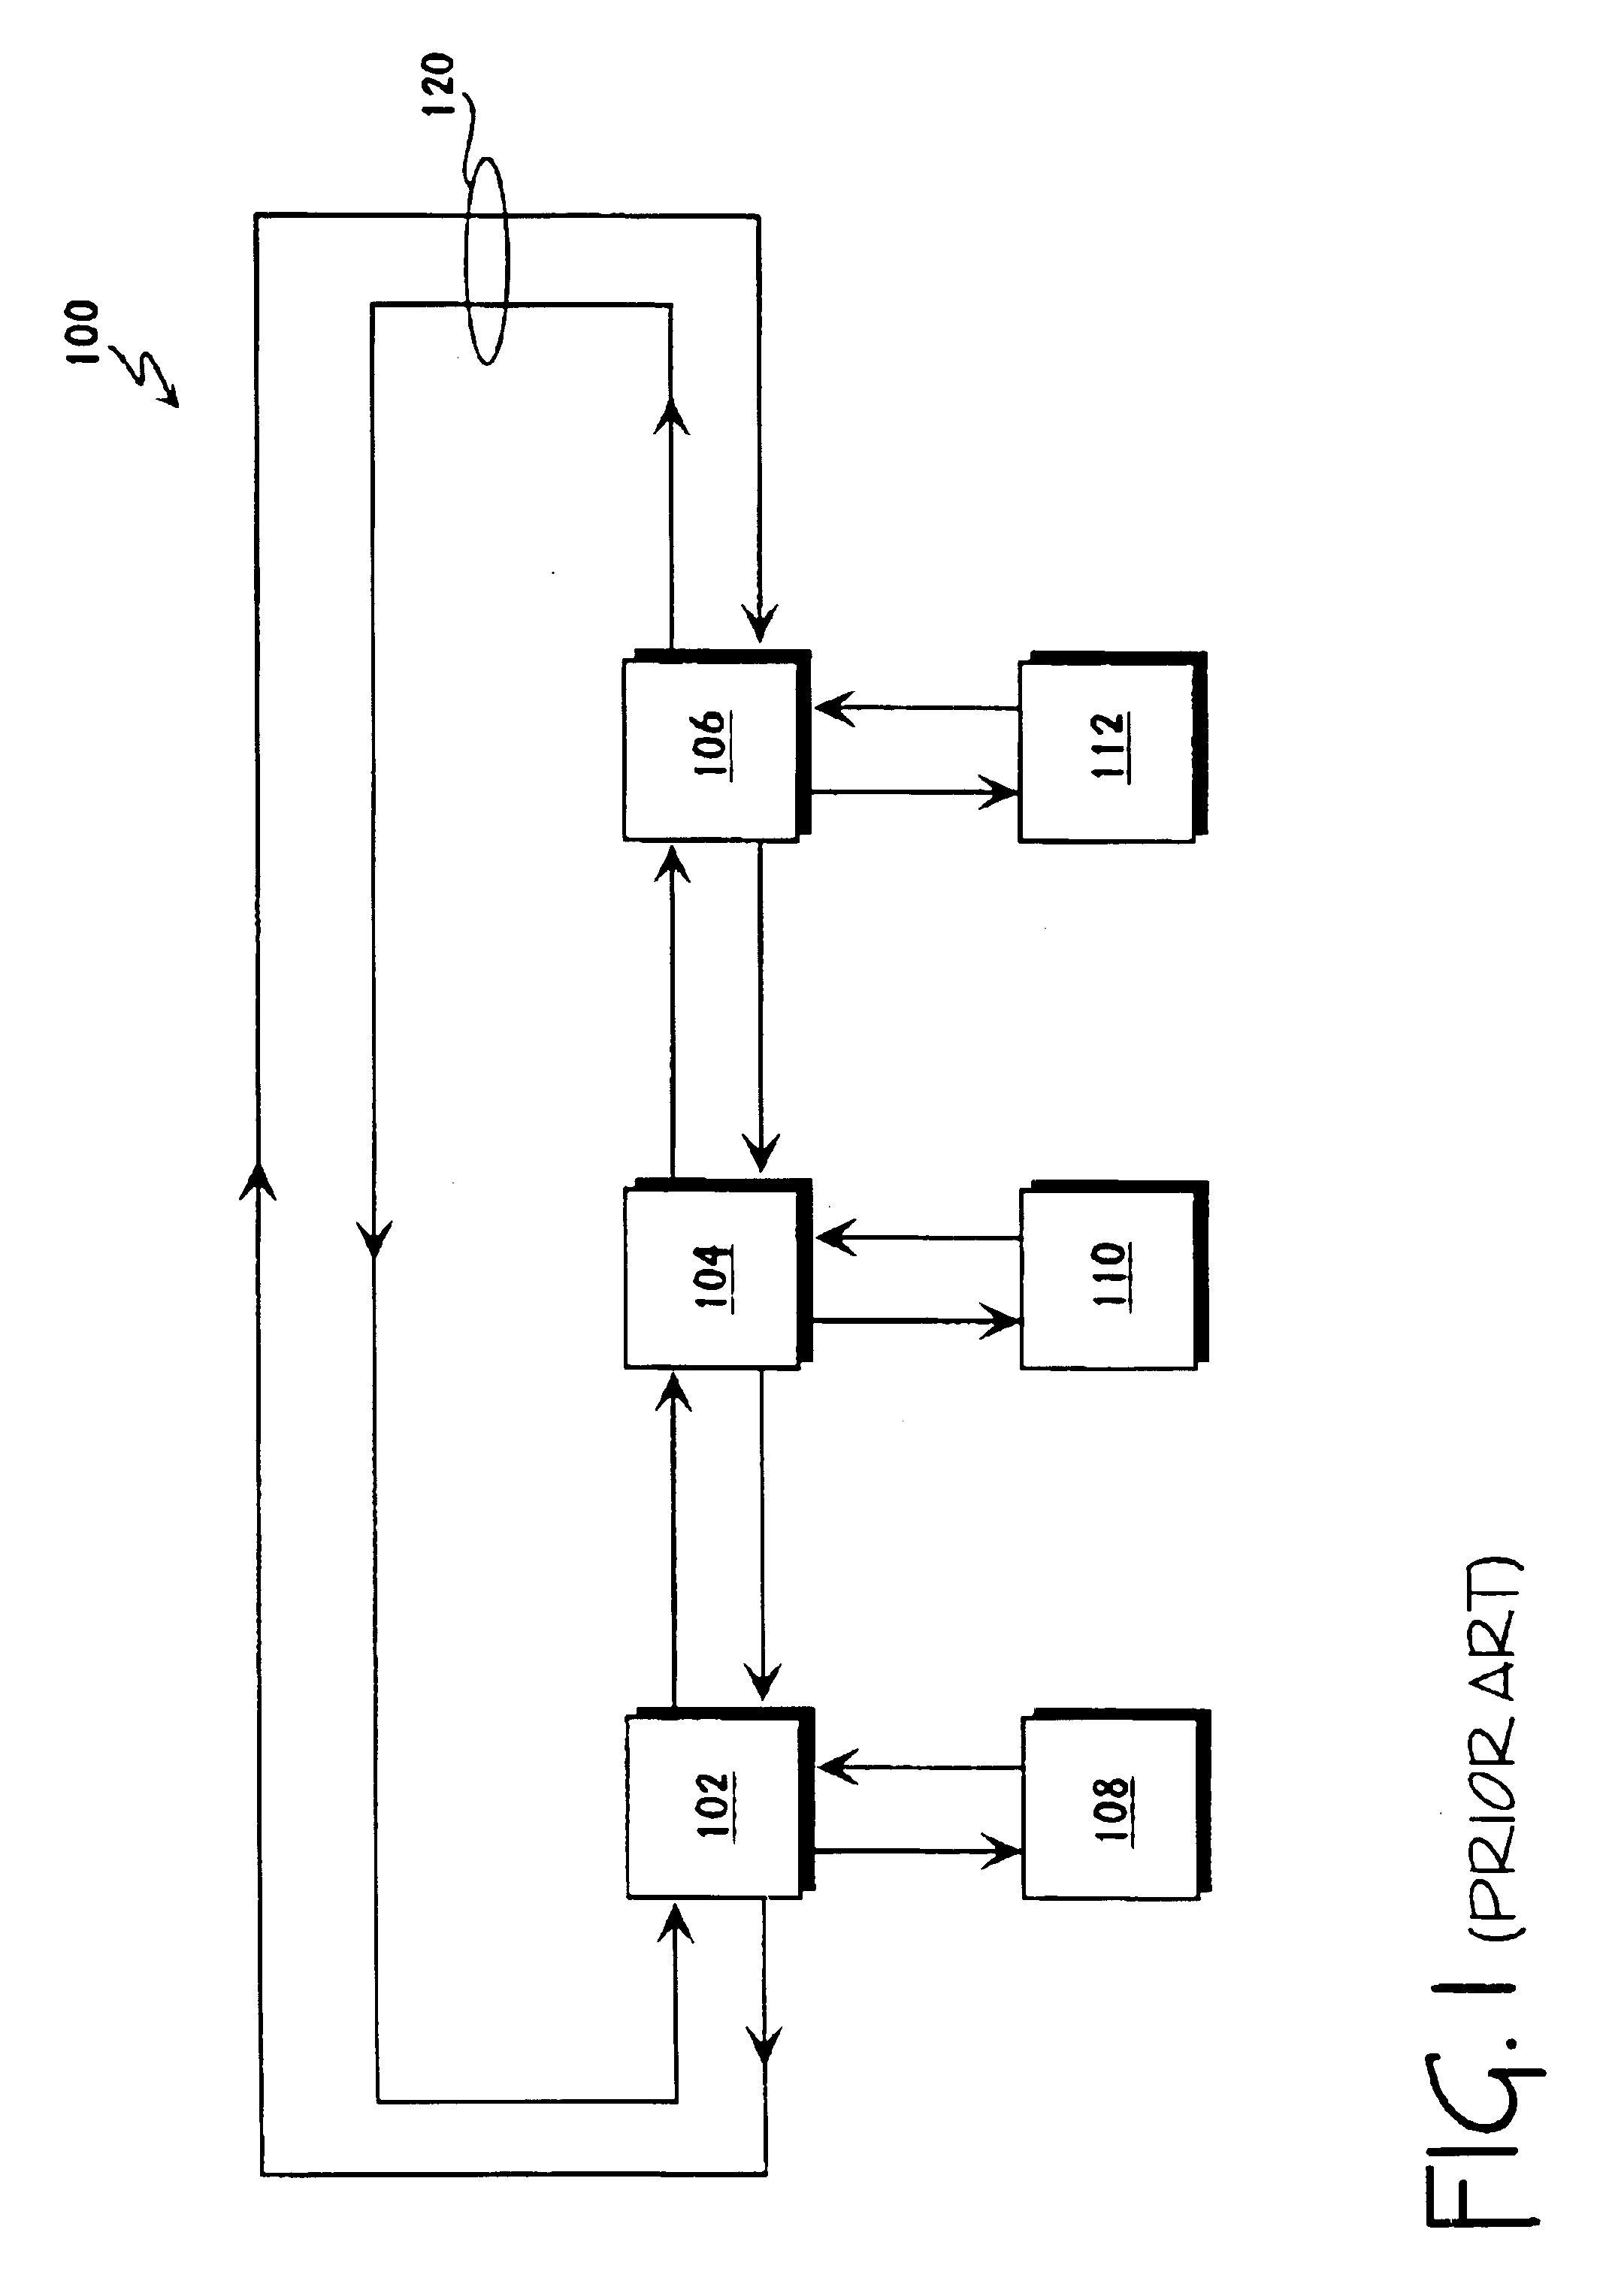 Method for routing network switching information